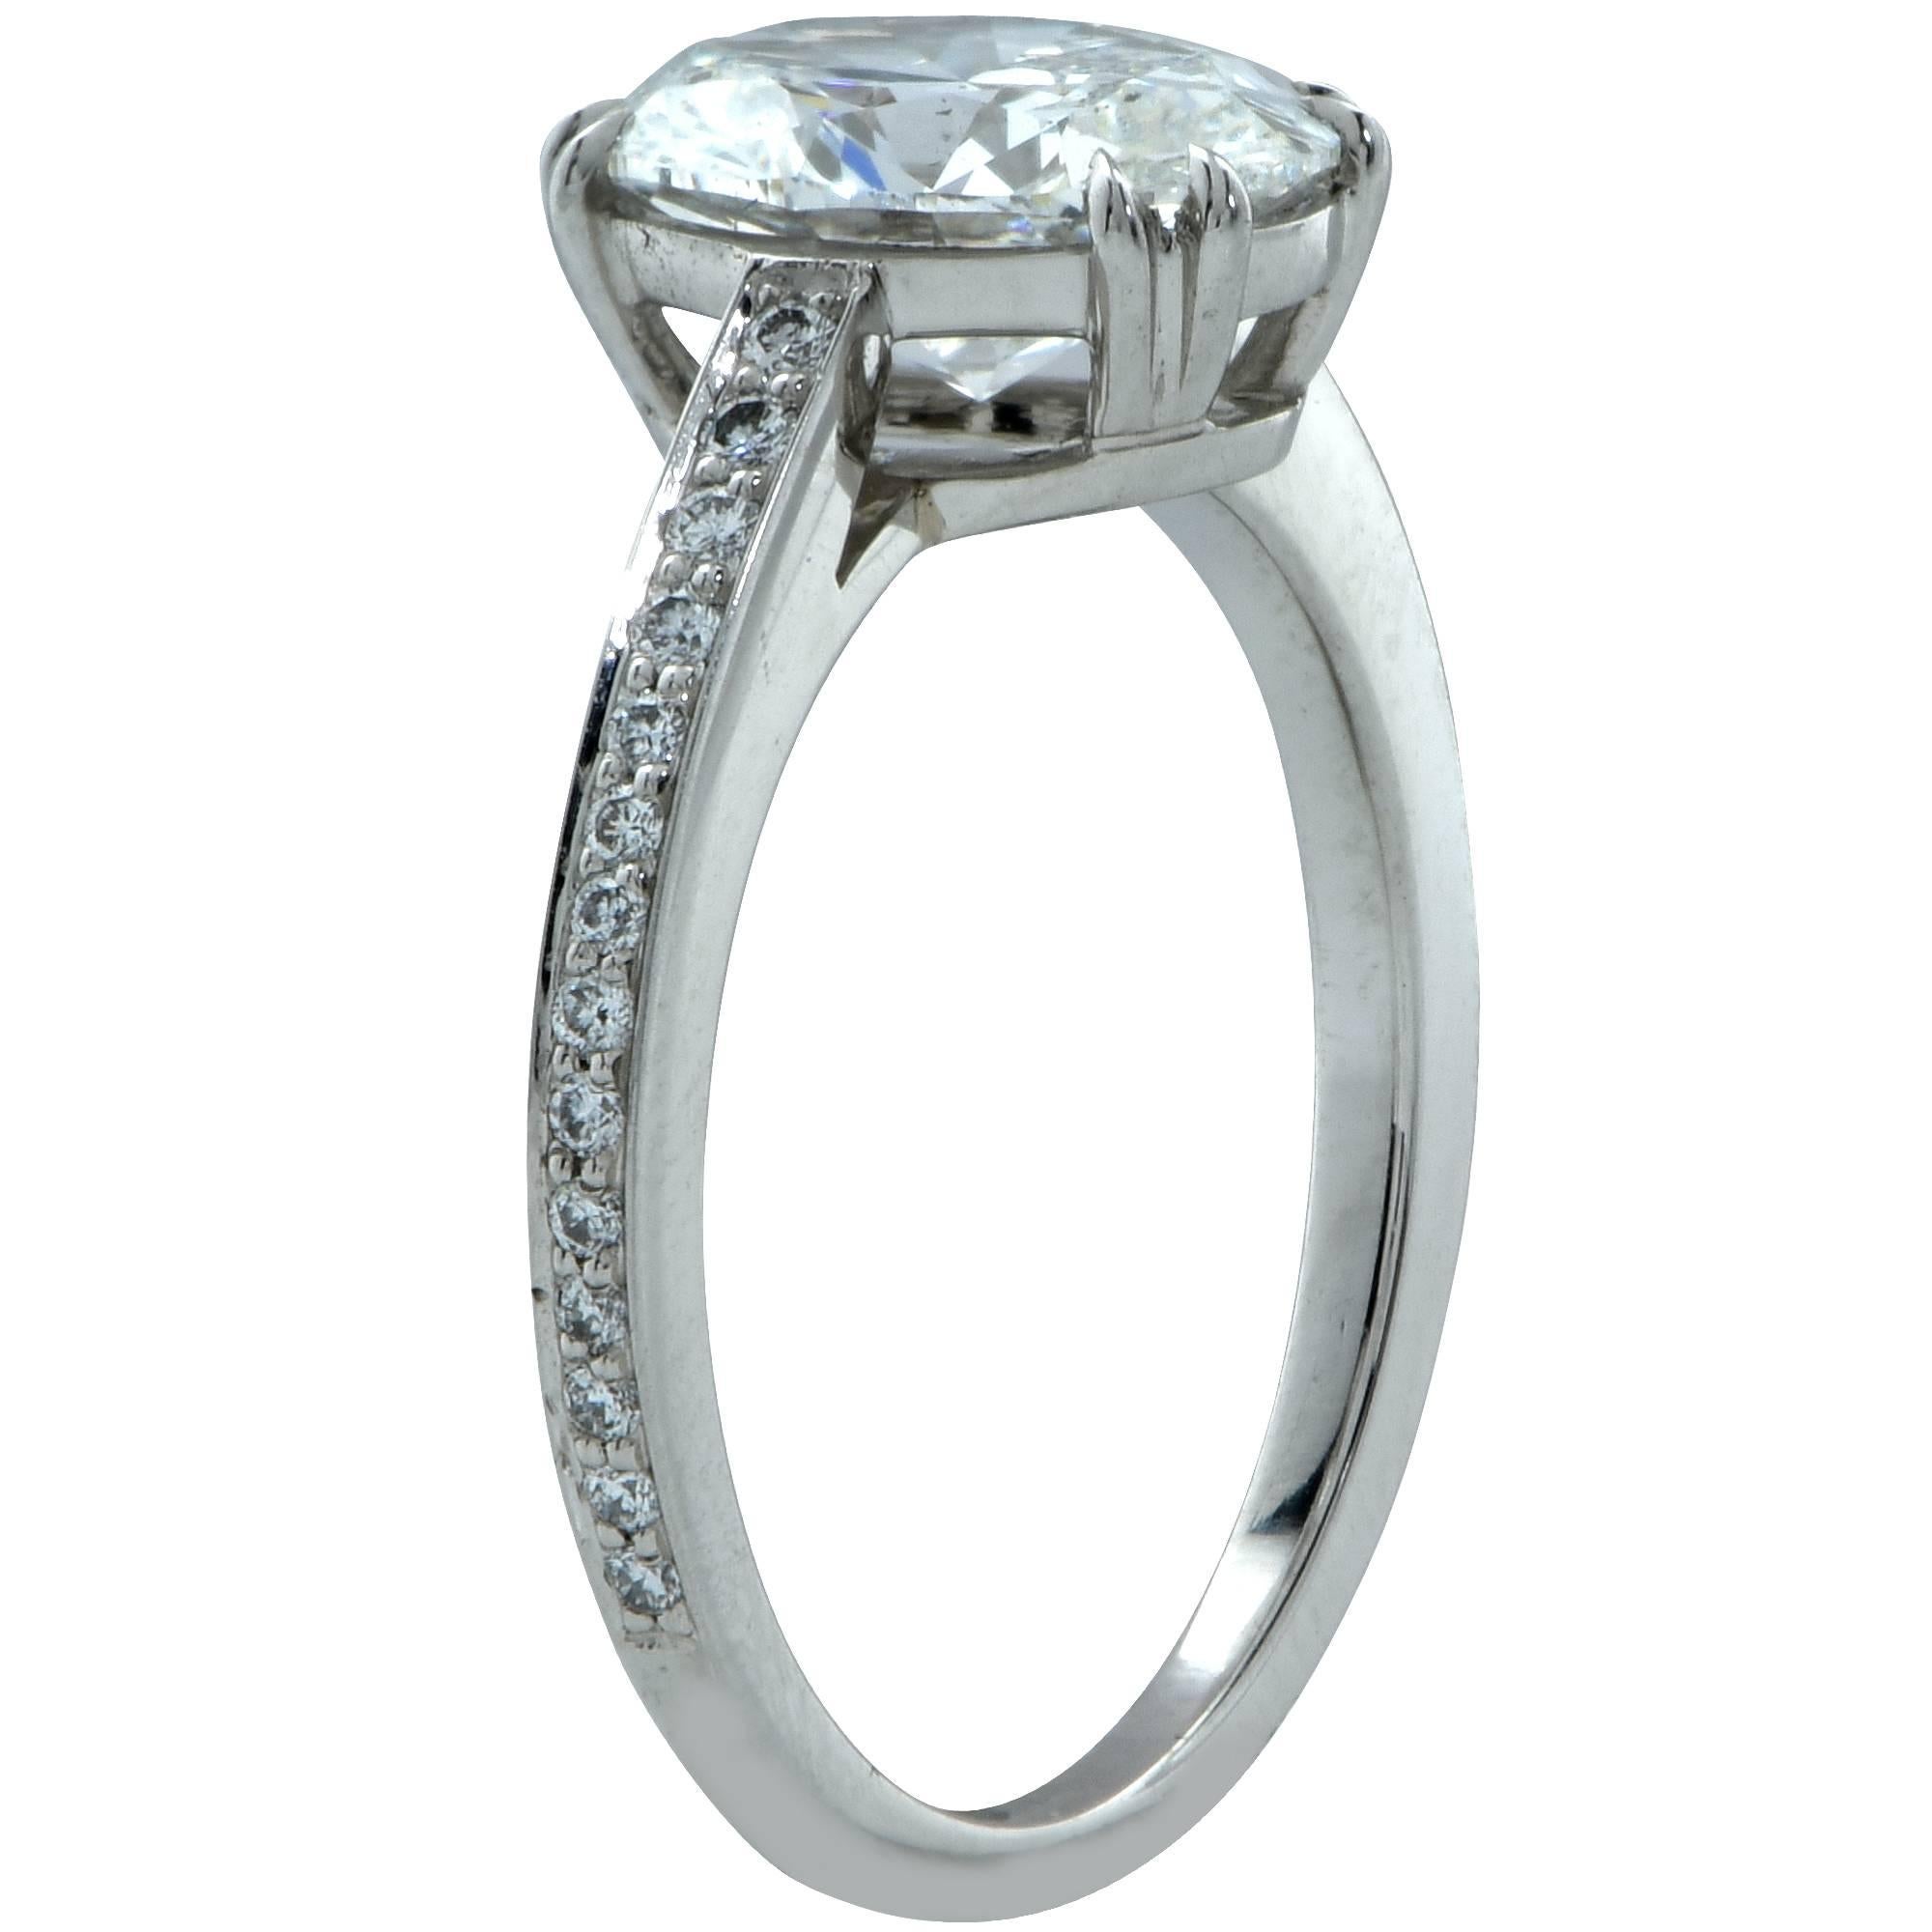 Platinum custom made ring featuring a GIA graded 2.00ct F color SI1 clarity oval cut diamond and accented by 28 round brilliant cut diamonds weighing .19cts total, F color VS clarity.

The ring is a size 6 and can be sized up or down.
Measurements